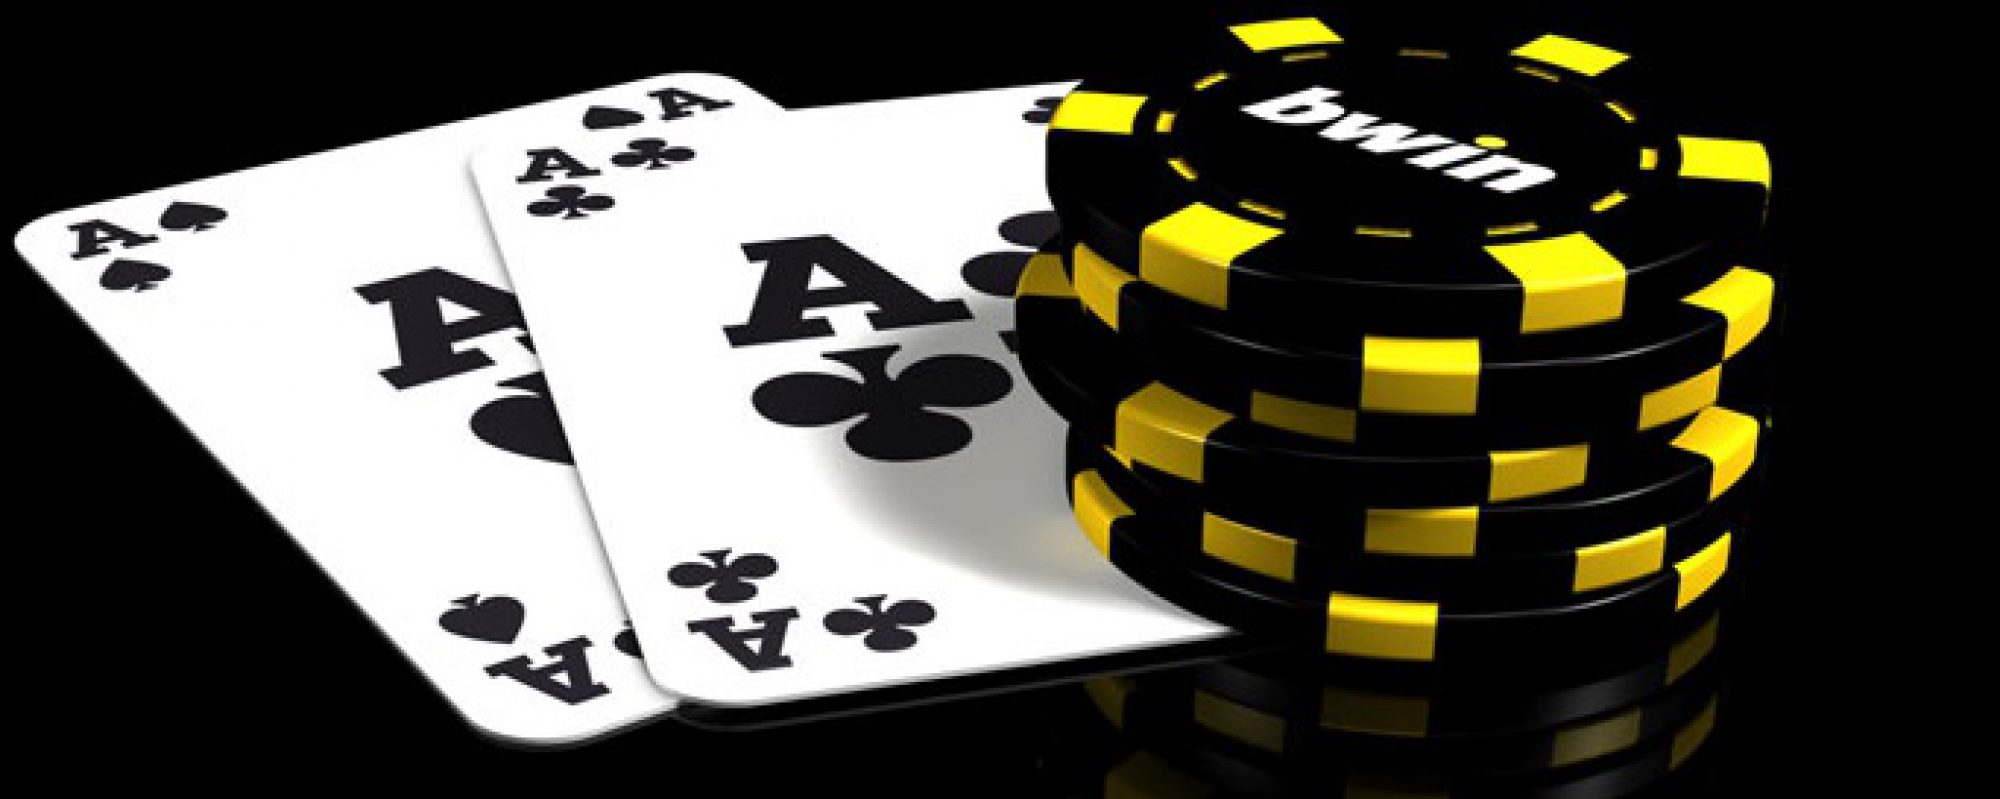 Online Casino Games - Always Deal With Reputed Casino Operator!